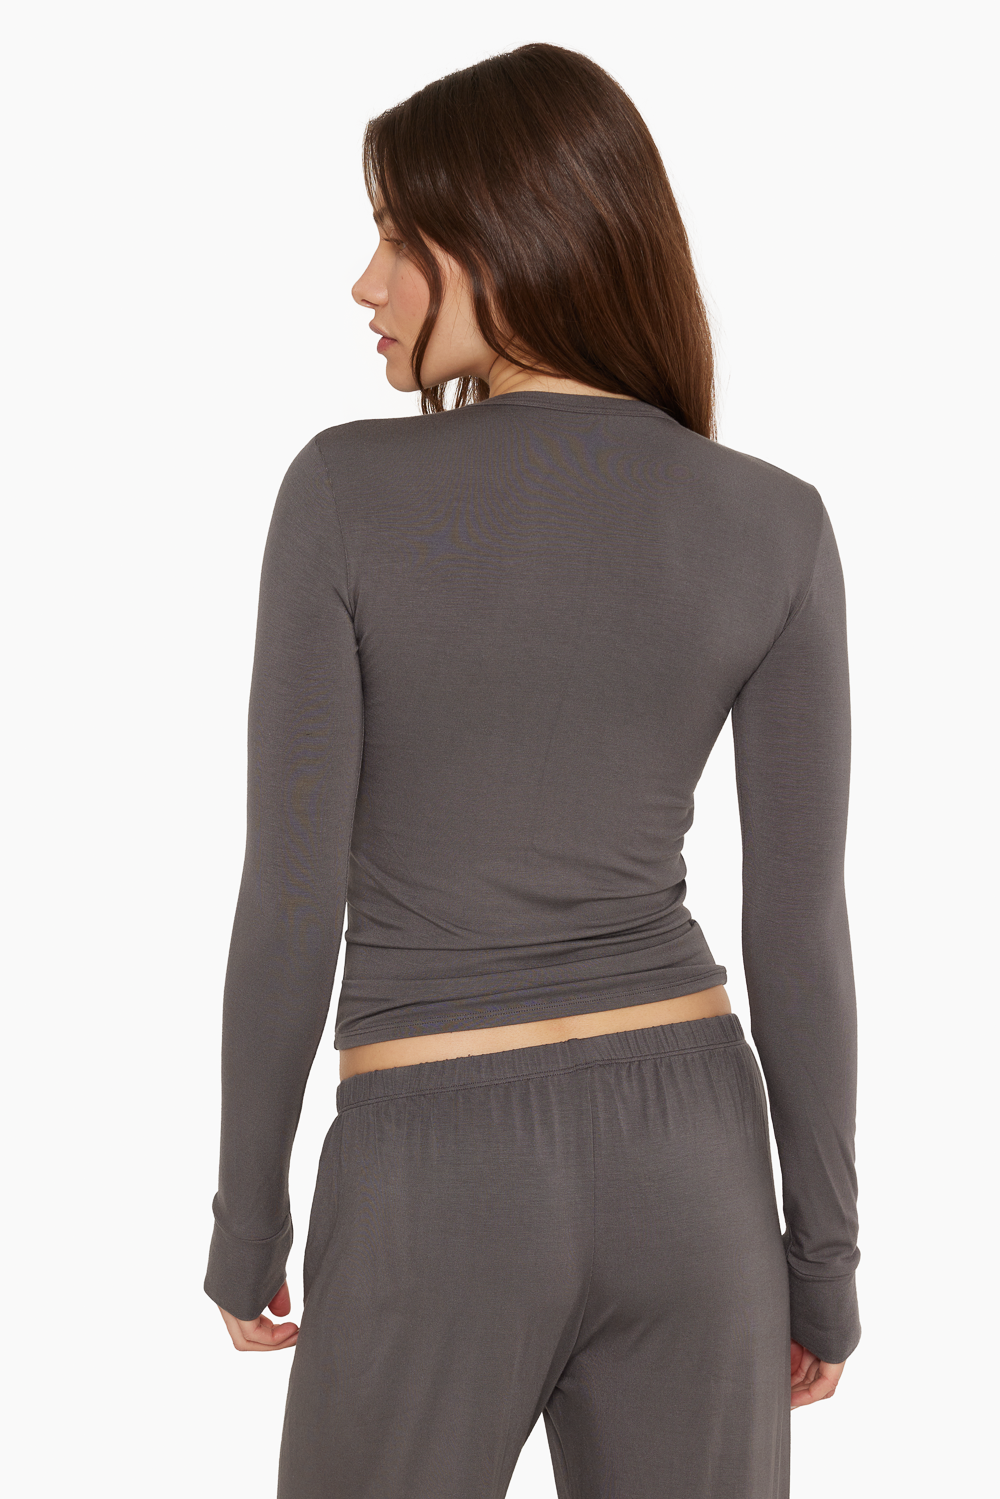 SLEEP JERSEY FITTED LONG SLEEVE - GRAPHITE